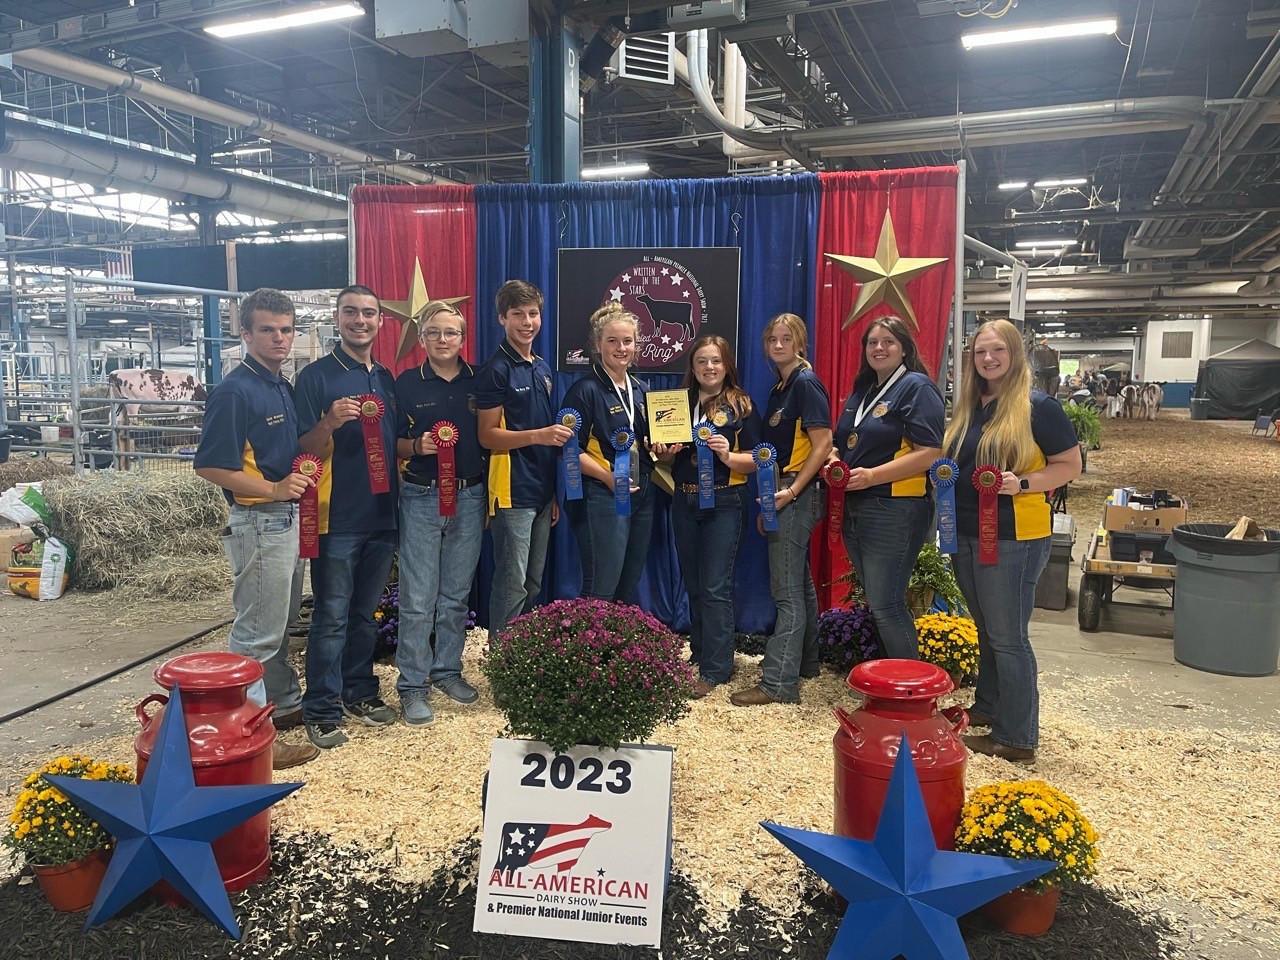 West Perry FFA members who competed at the 2023 All-American Dairy Management Contest